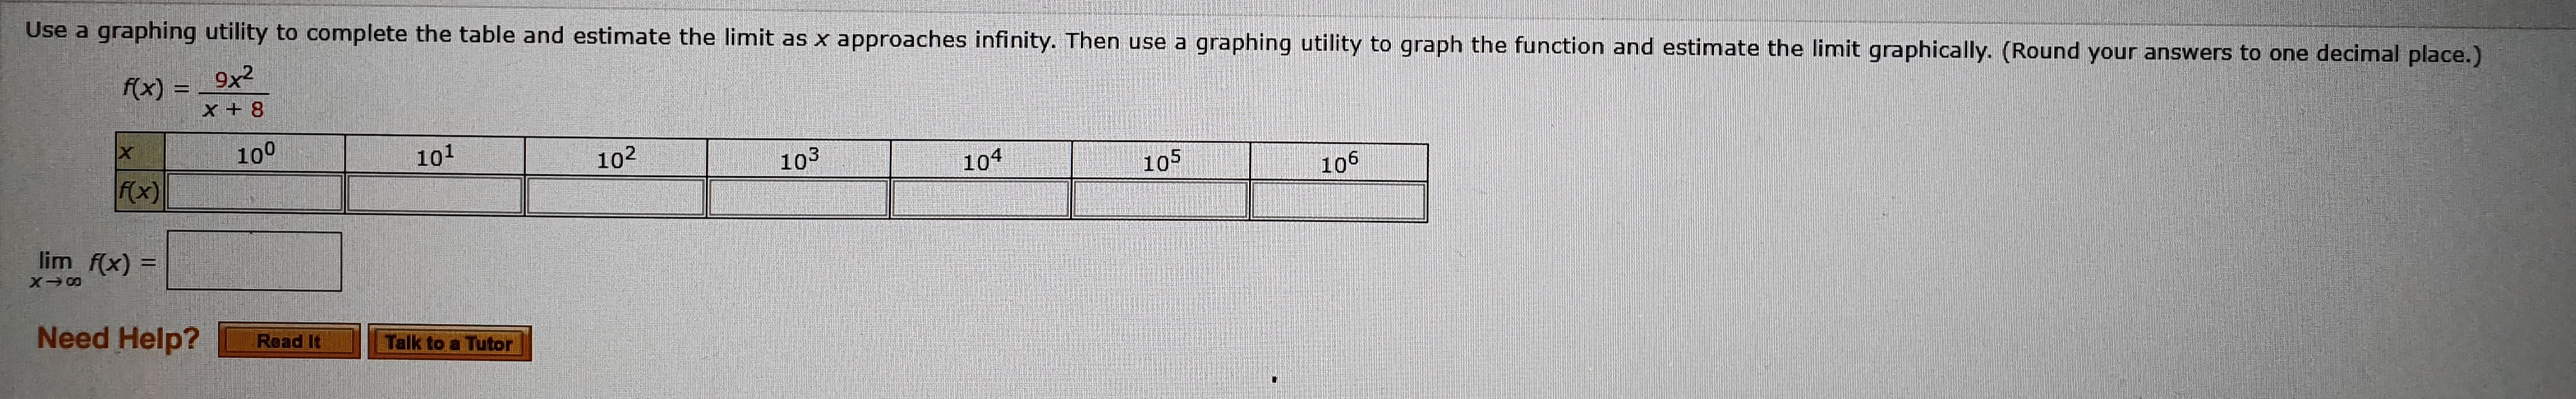 Use a
graphing utility to complete the table and estimate the limit as x approaches infinity. Then use a
graphing utility to graph the function and estimate the limit graphically. (Round your answers to one decimal place.)
fx)9x2
8+X
100
101
102
103
f(x)
104
105
106
lim f(x)
Need Help?
Read It
Talk to a Tutor
